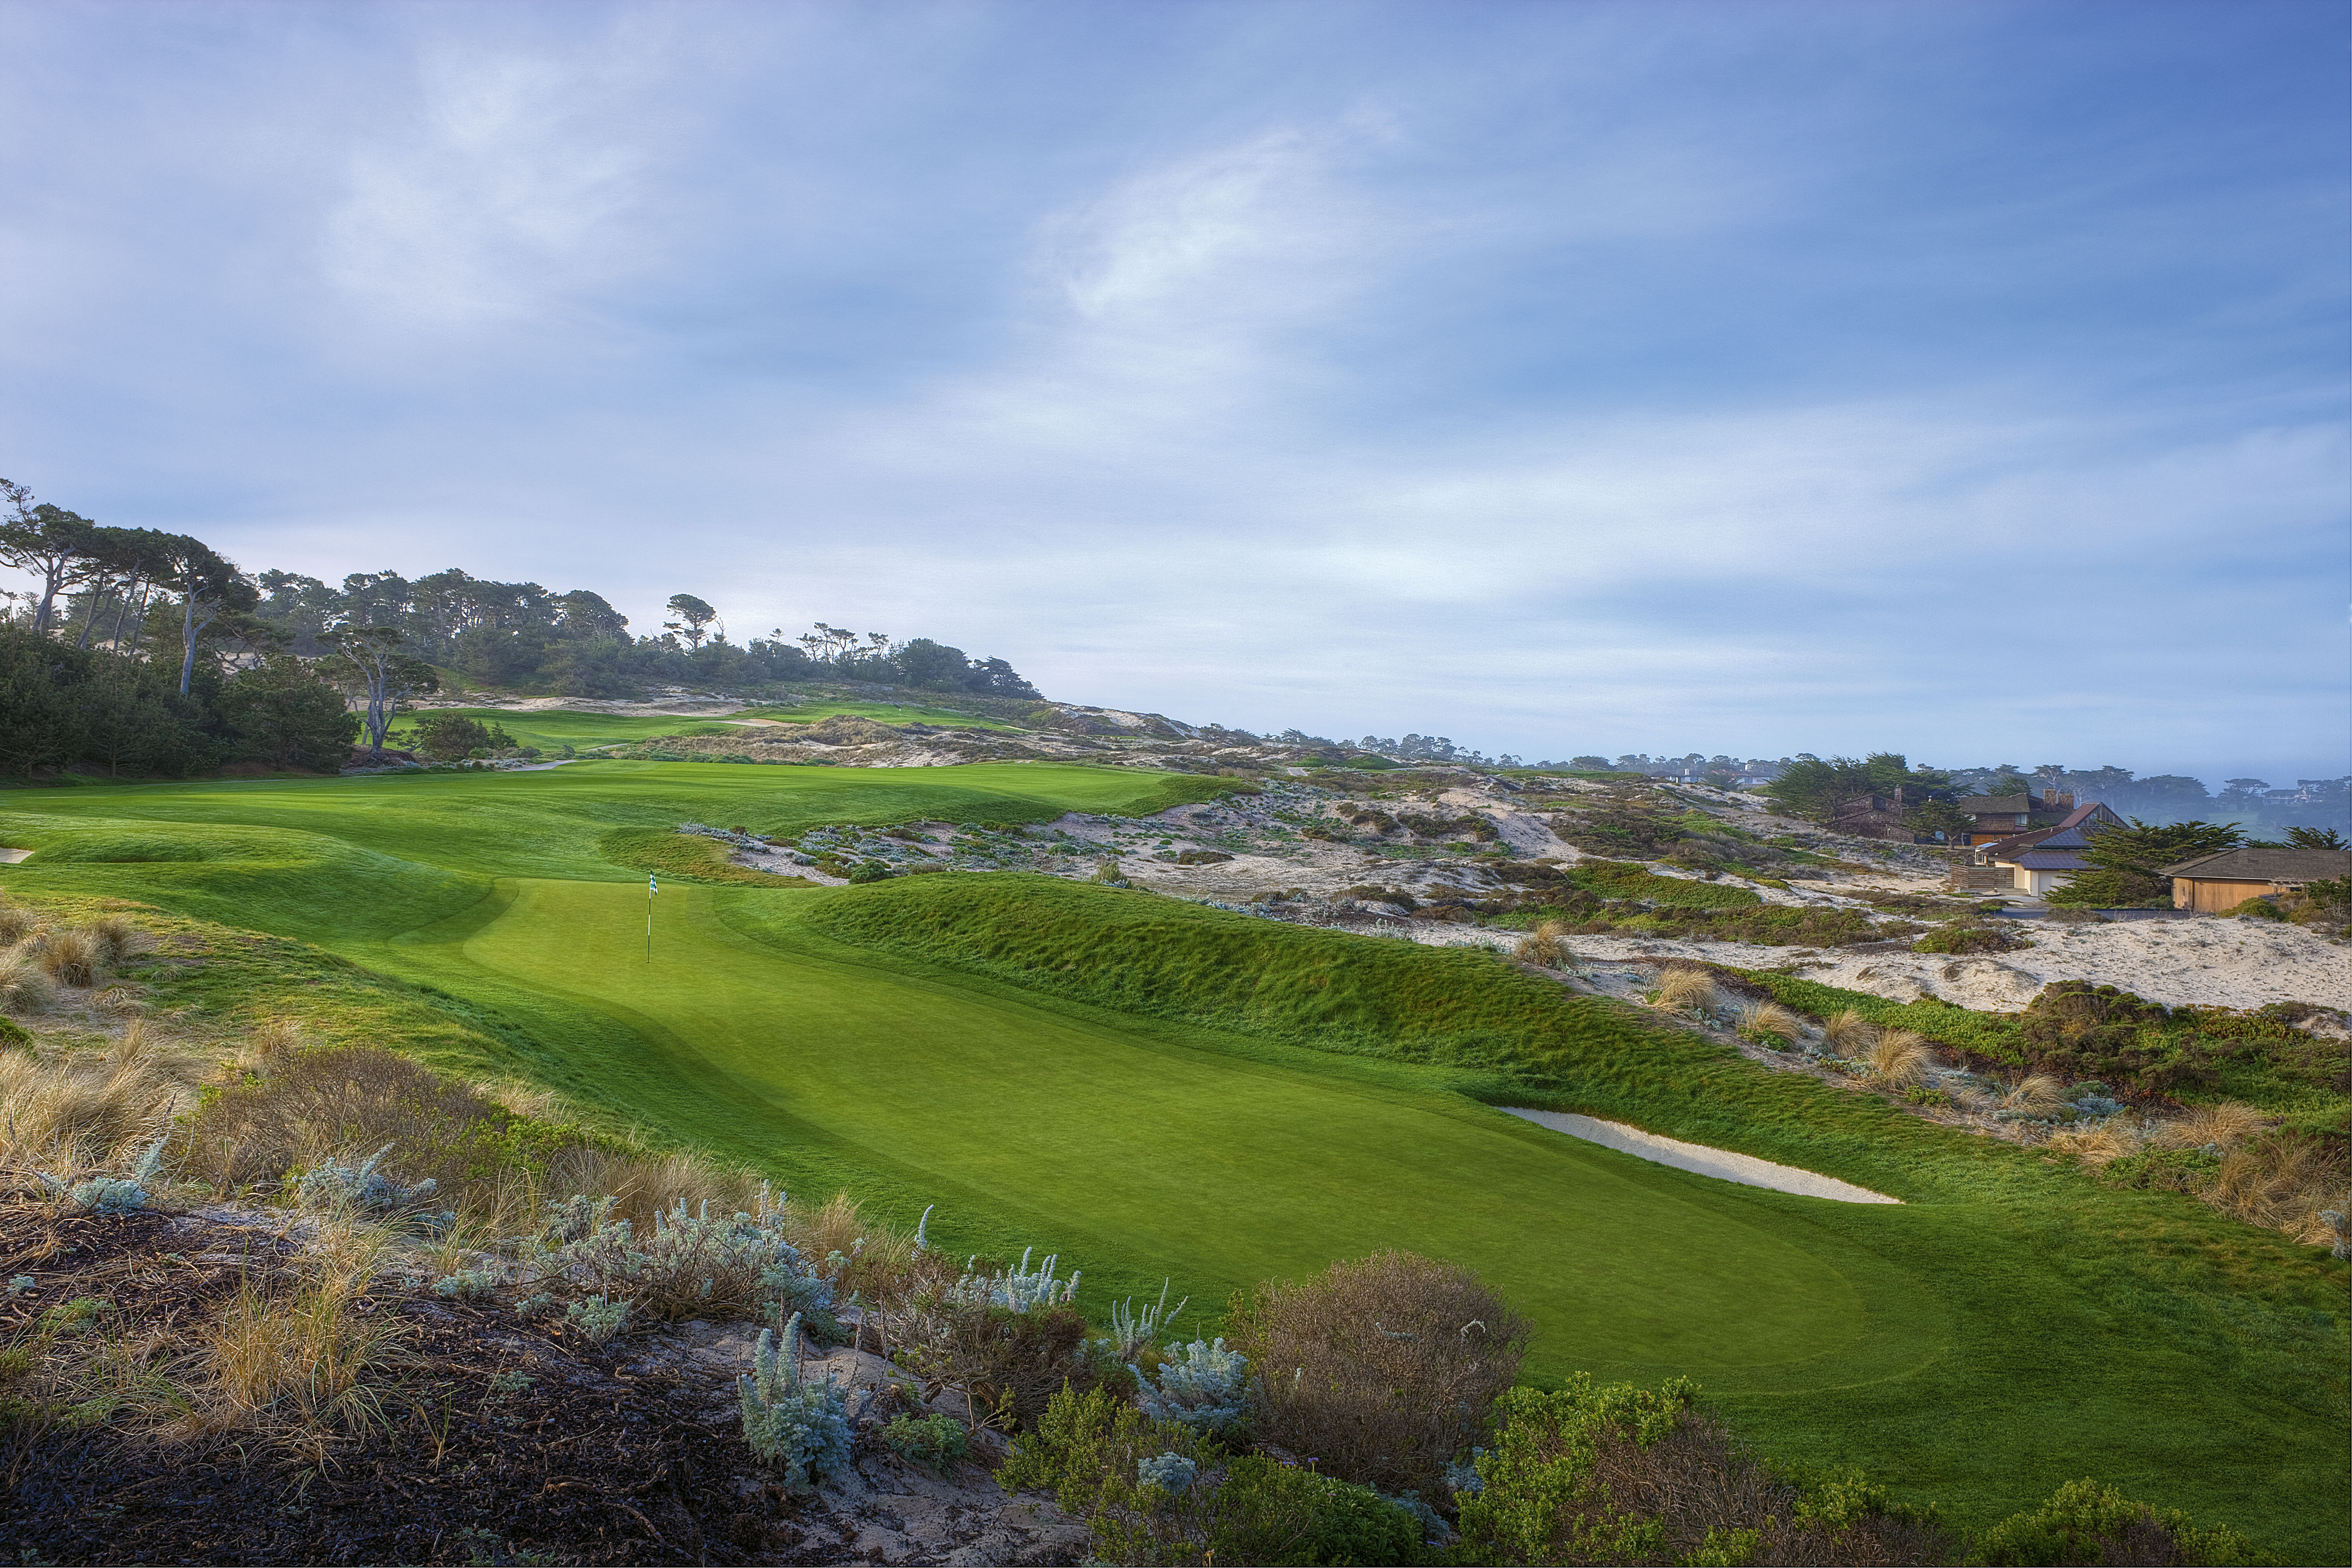 4th hole at Spyglass Hill